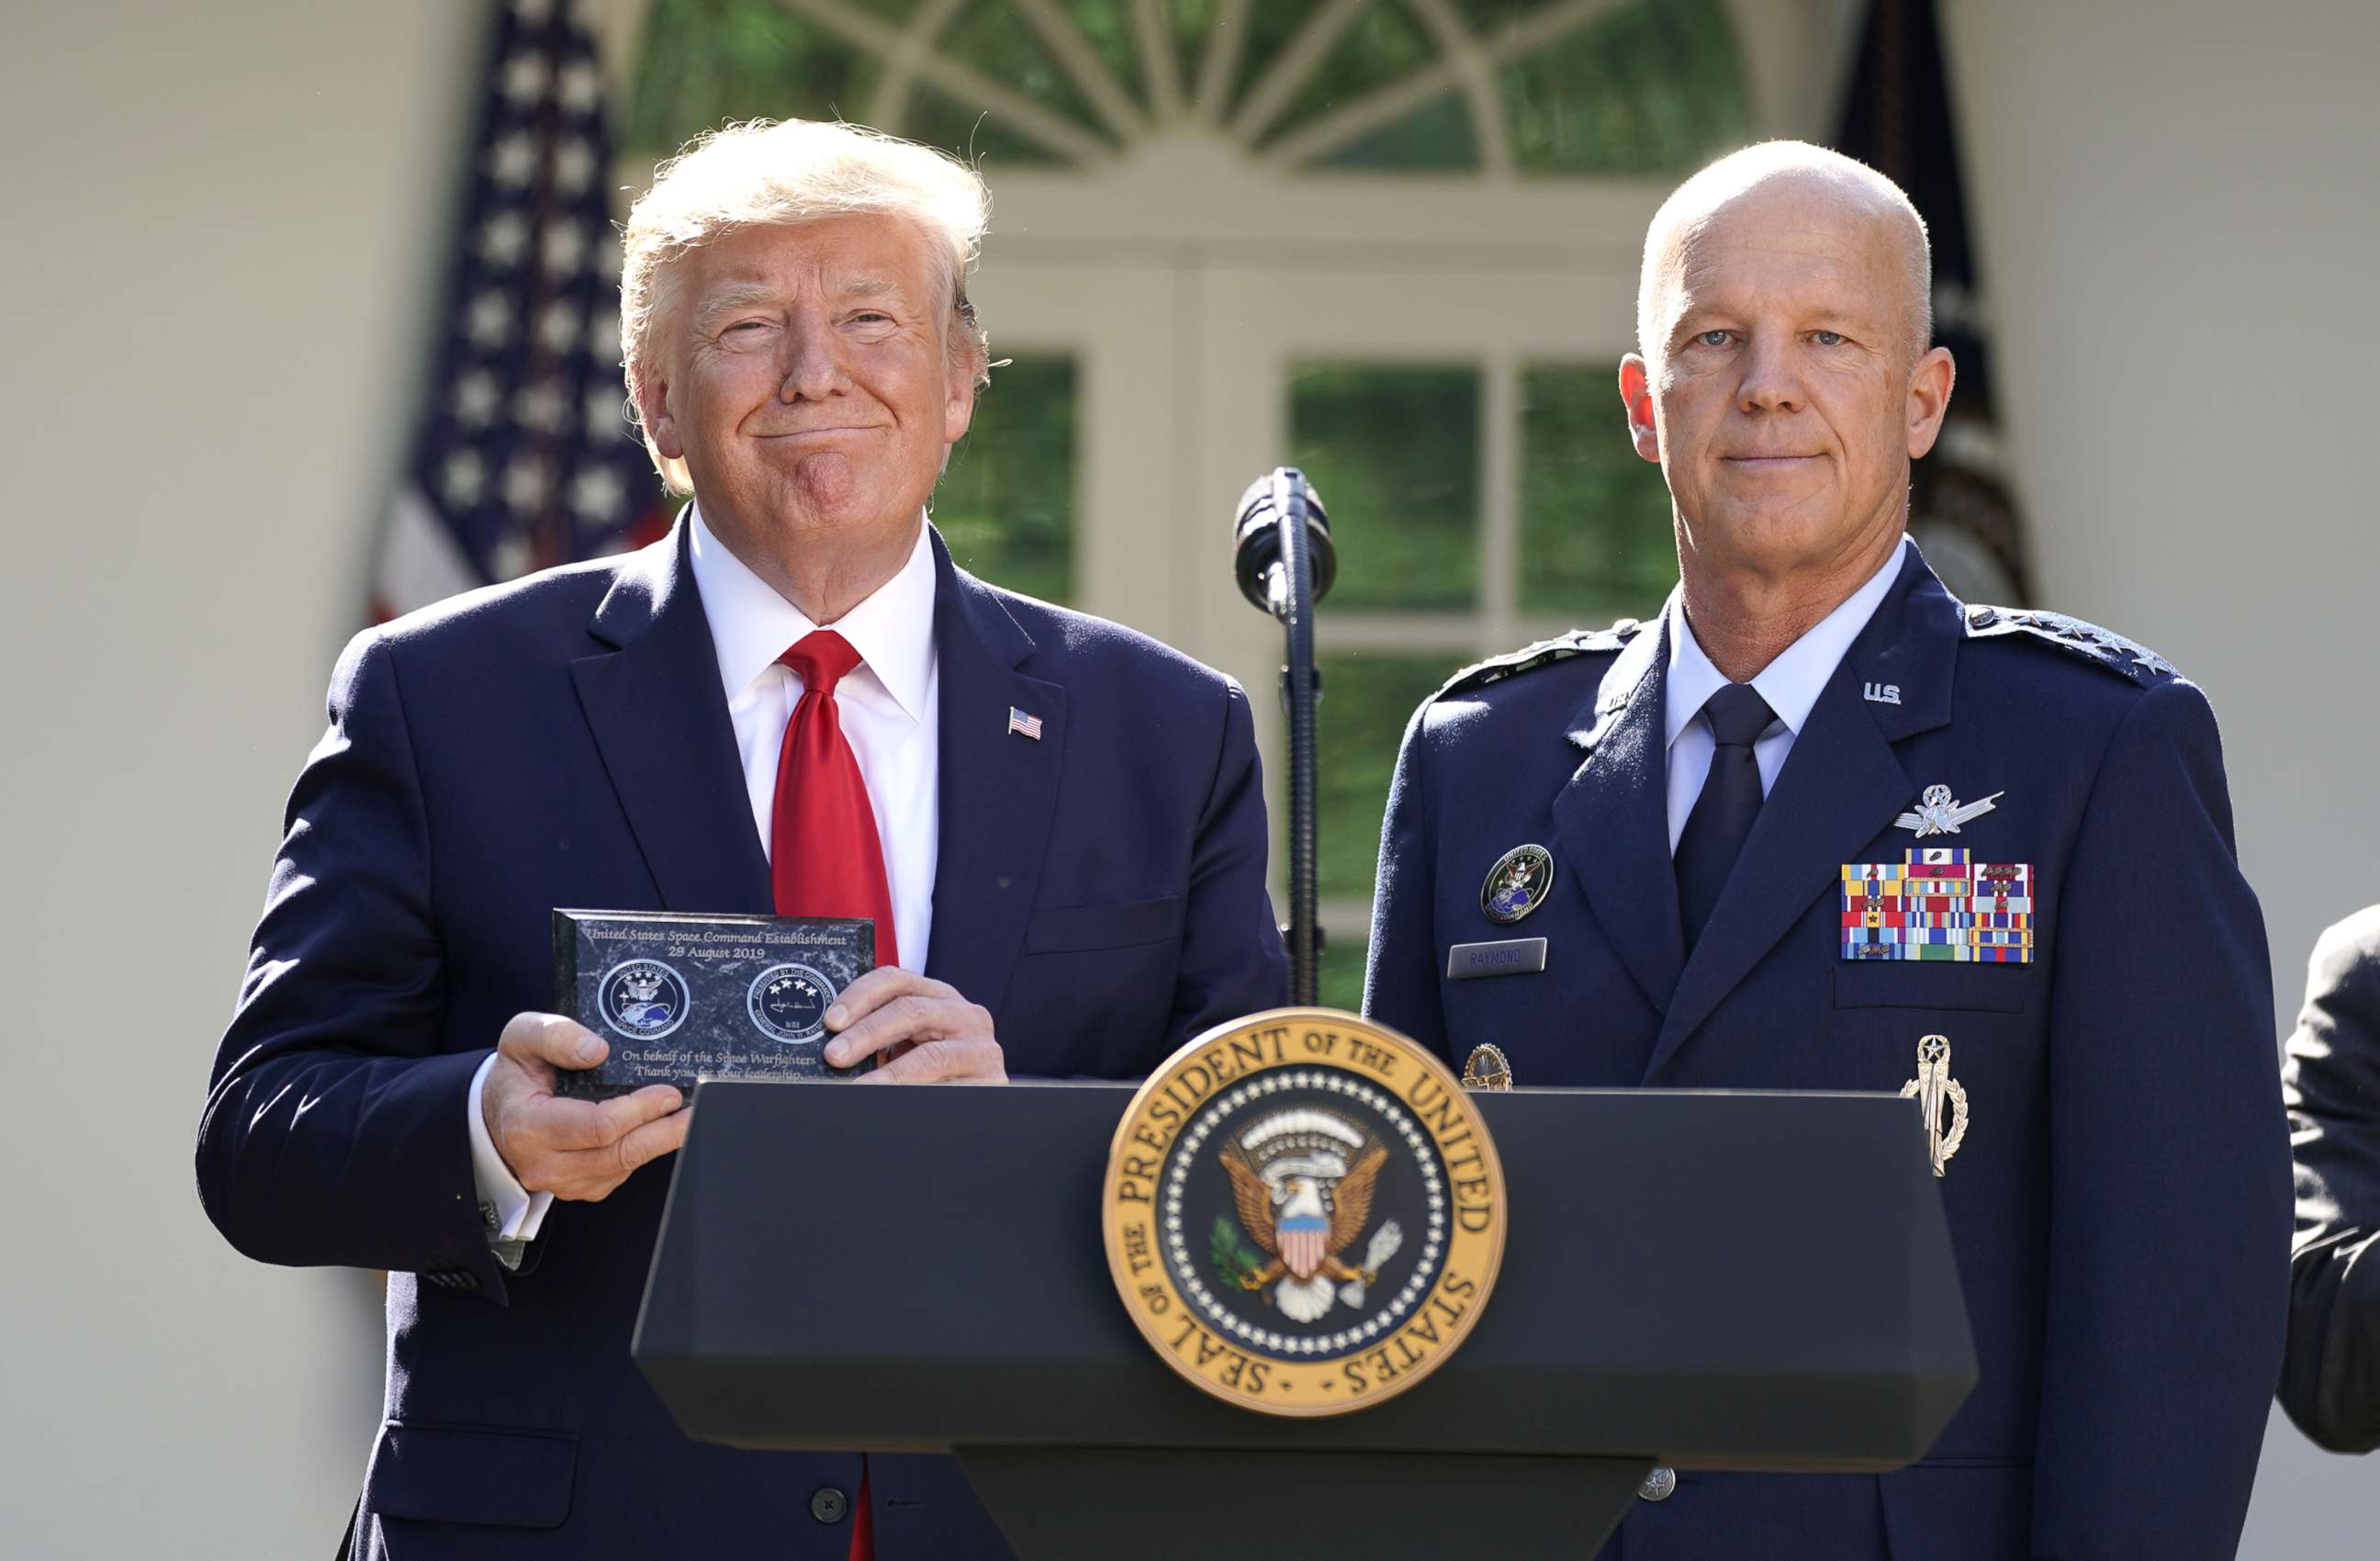 PHOTO: President Donald Trump stands with General John Raymond, incoming U.S. Space Command commander, during an event to officially launch the United States Space Command in the Rose Garden of the White House, Aug. 29, 2019